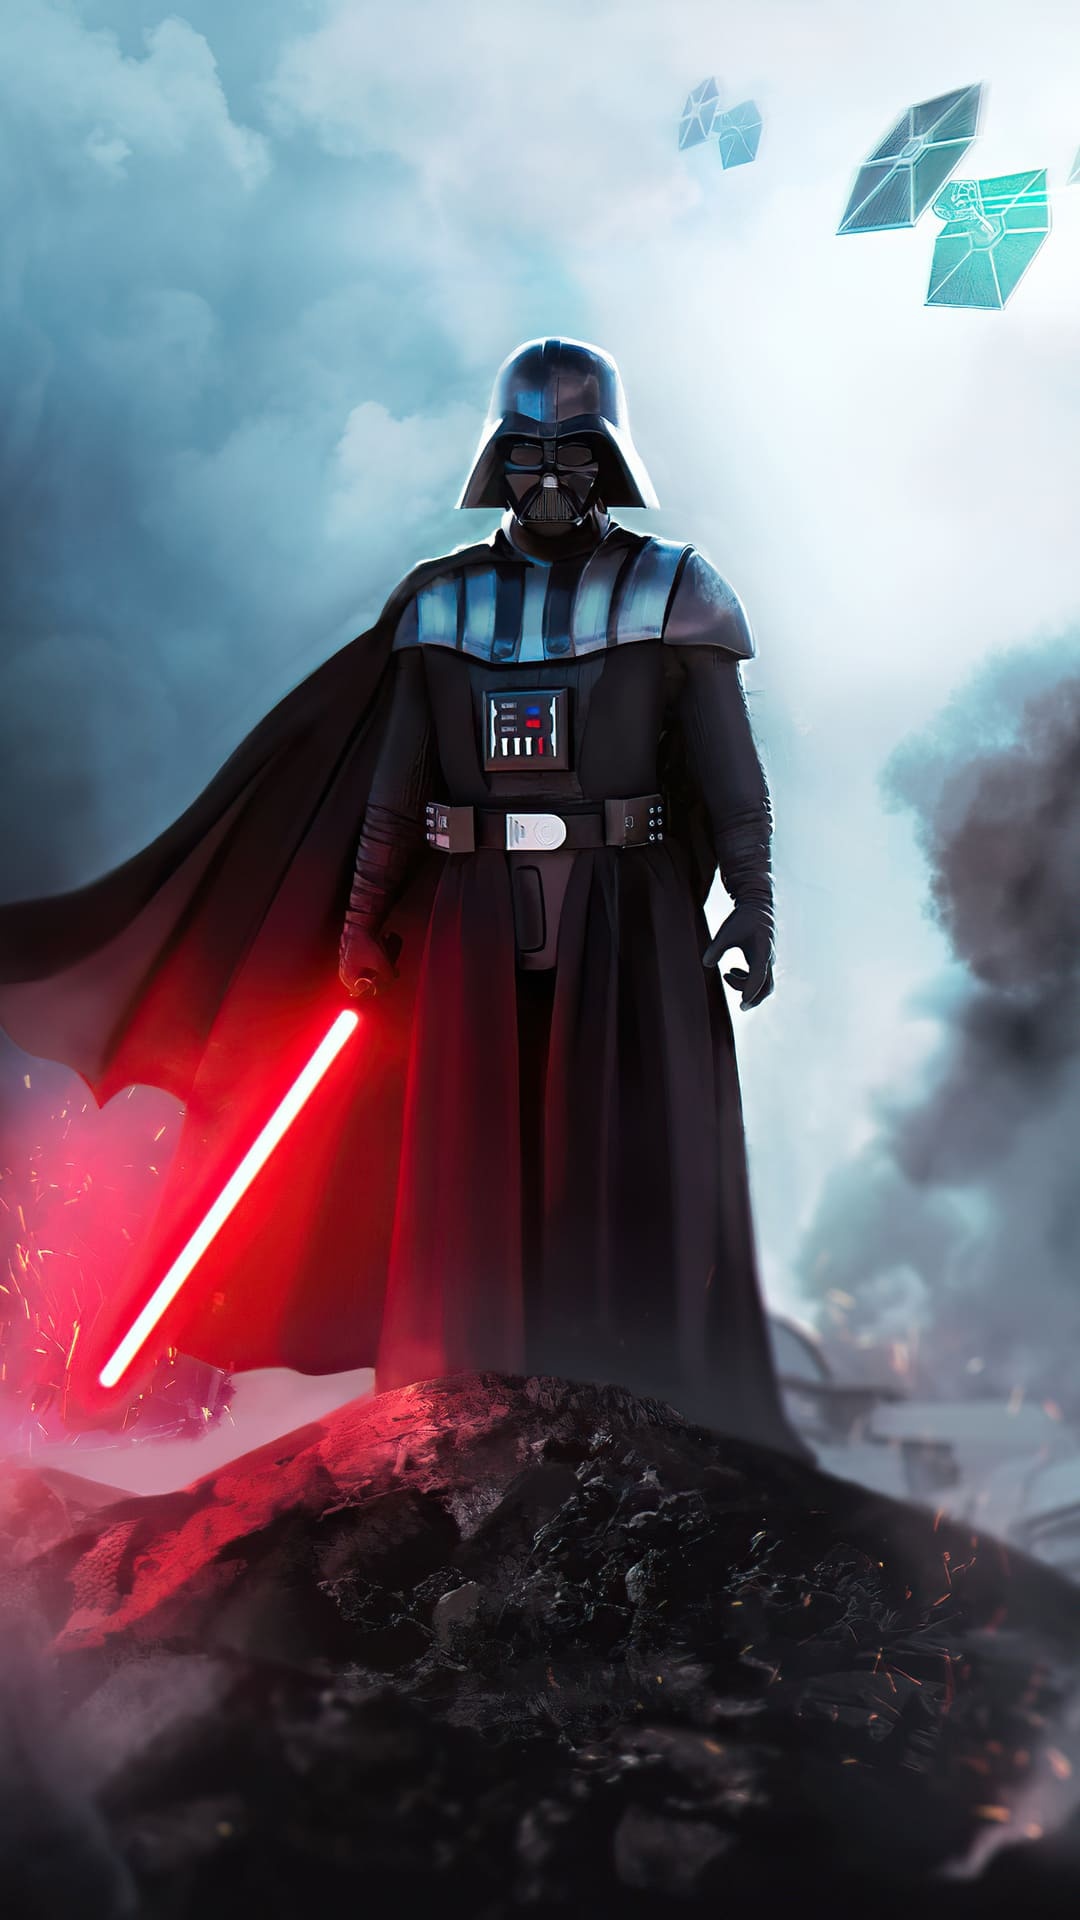 Darth Vader: Was seduced by the promise of saving his wife Padme Amidala from death. 1080x1920 Full HD Background.